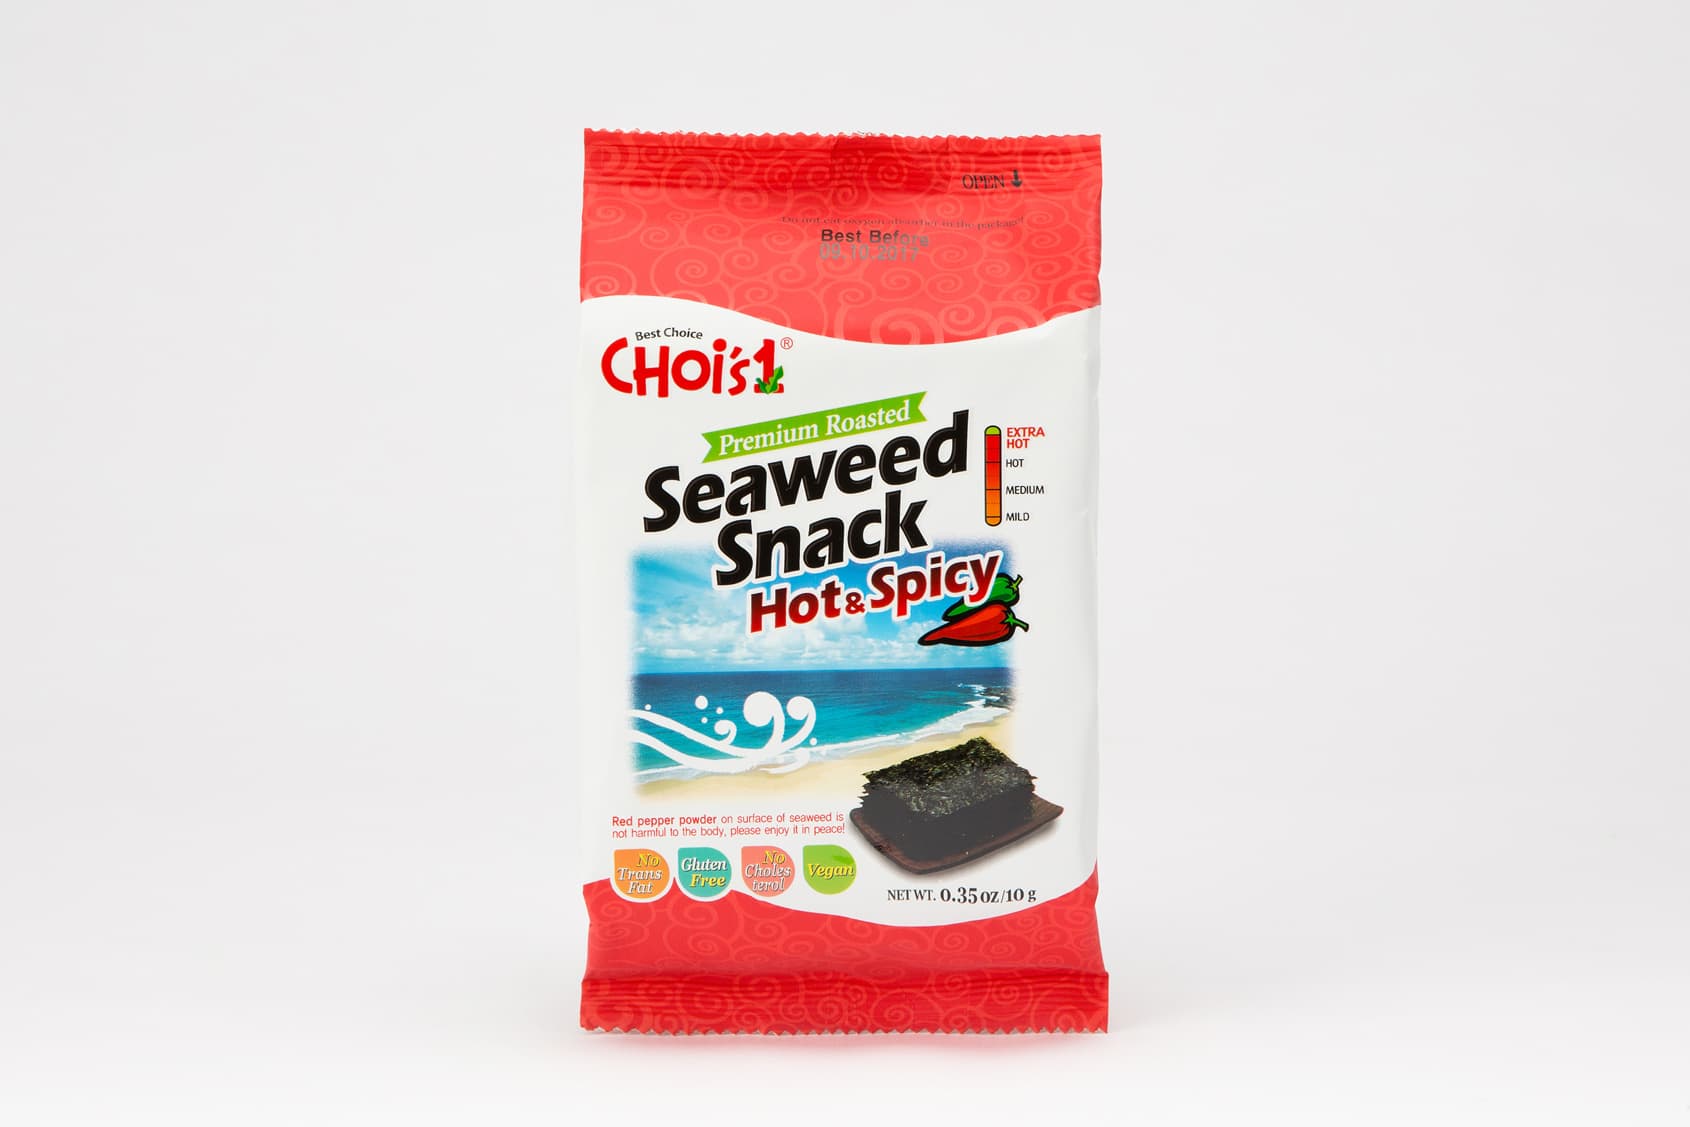 Choi_s1 Seaweed Snack _Hot_Spicy